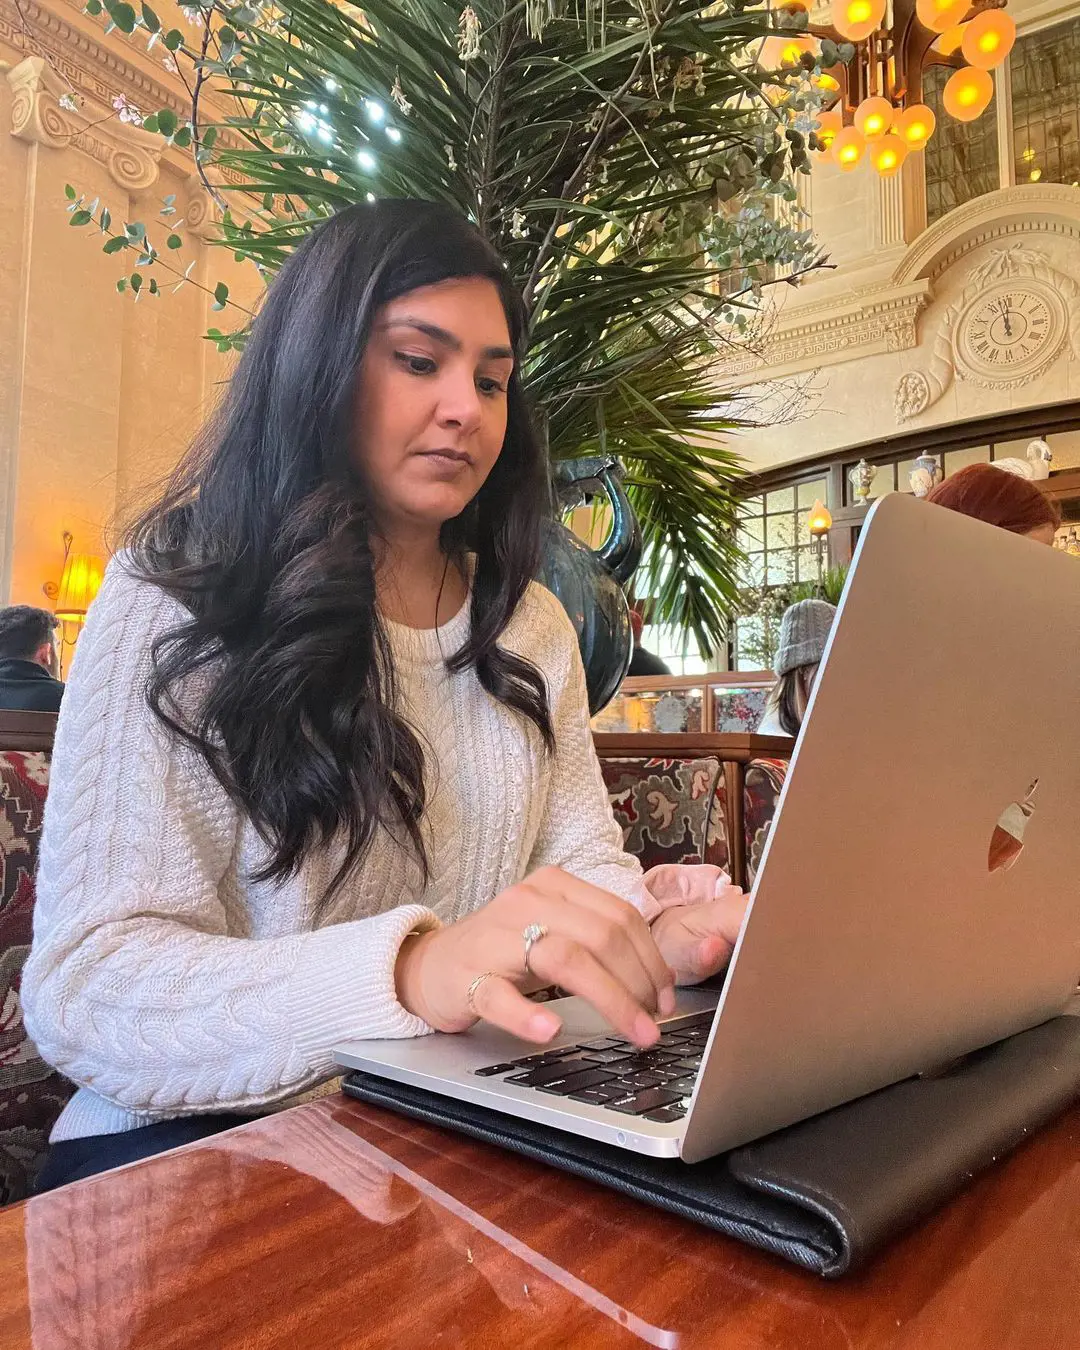 Kalra can work technically work from anywhere when not showing properties. She works on every vacation and weekend as her goal is to grow and success